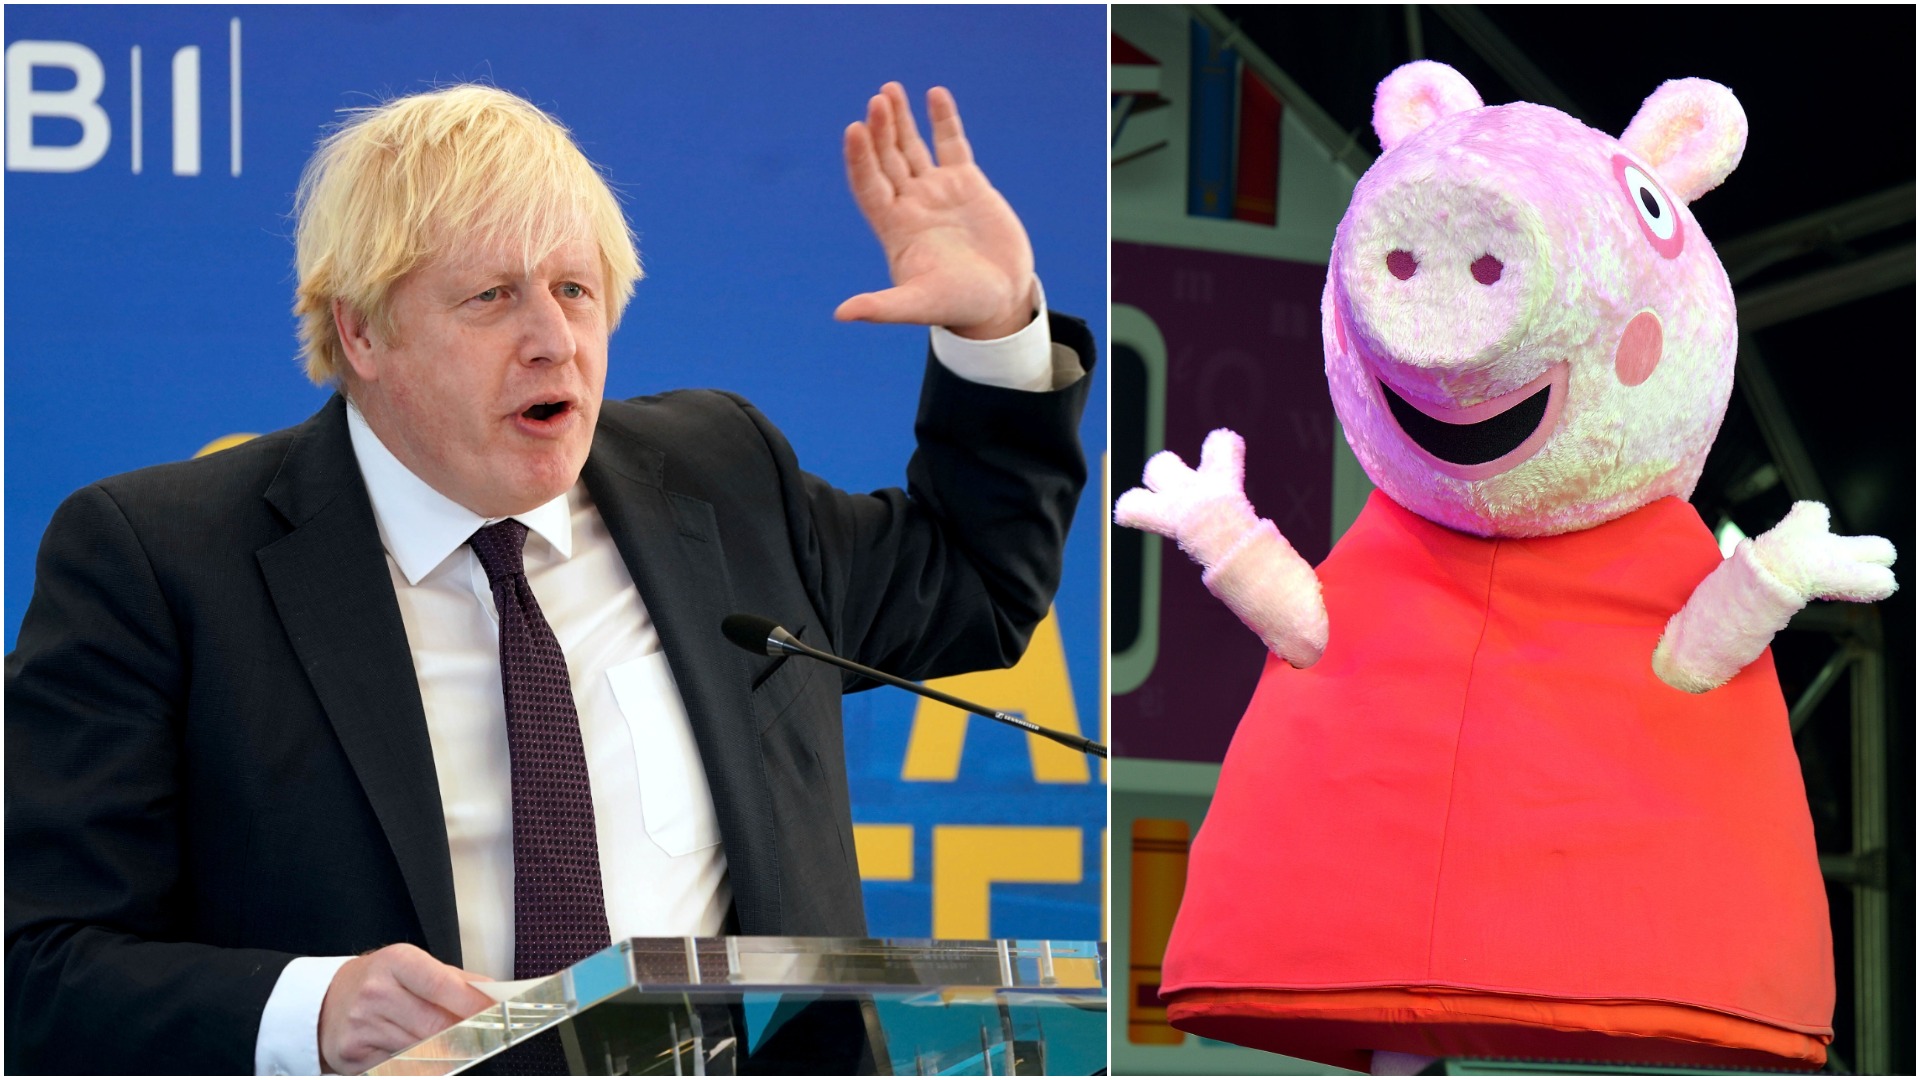 Peppa Pig' introduces same-sex couple after petition for more LGBTQ  characters